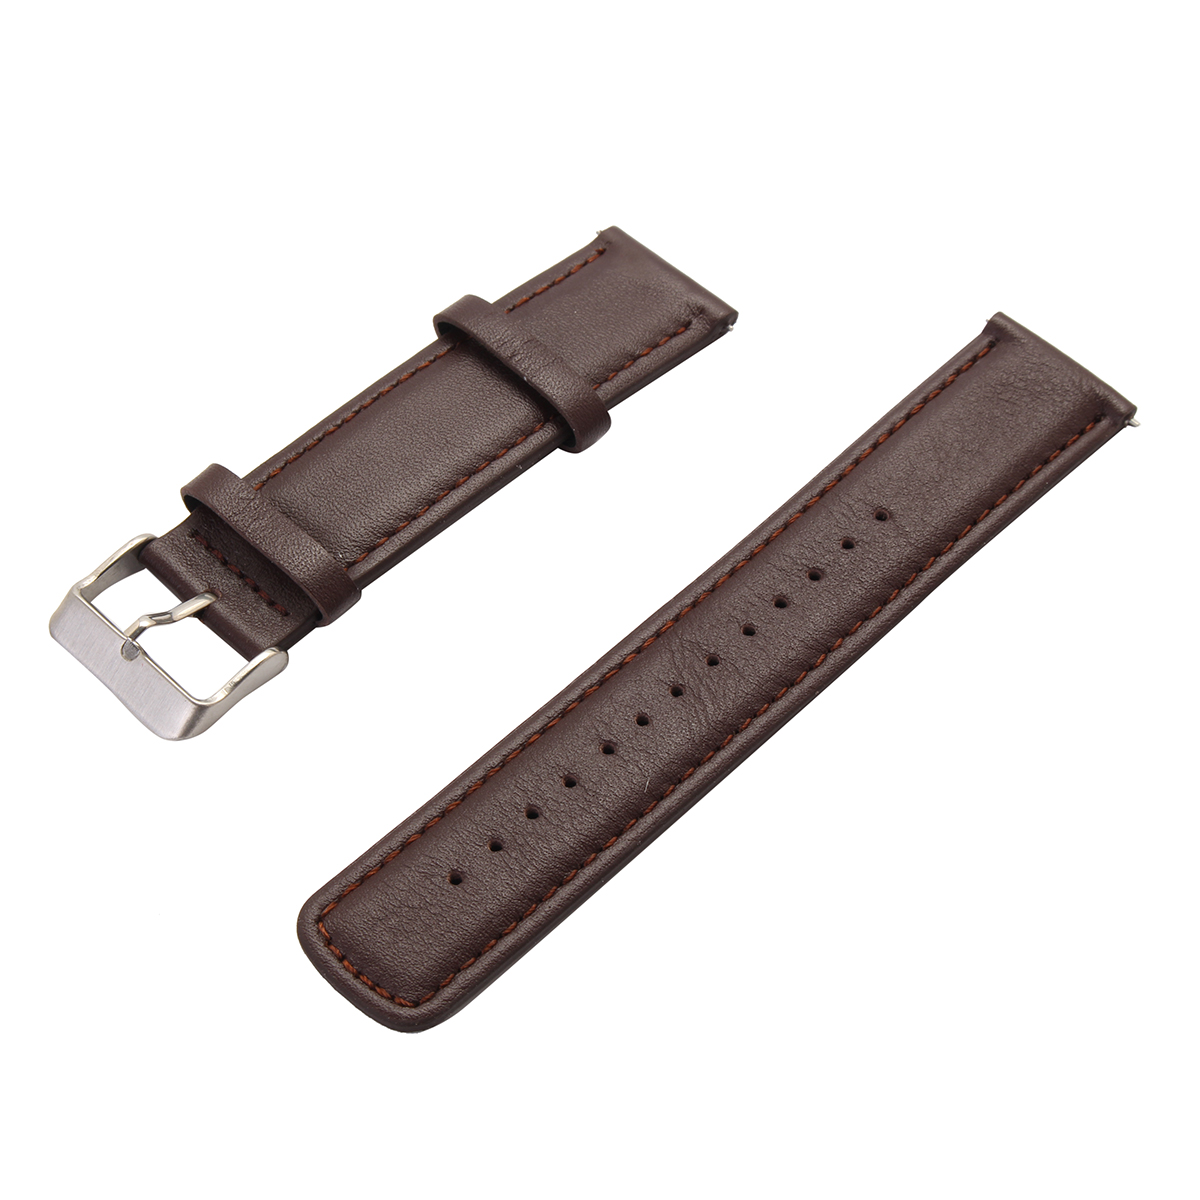 22mm-Replaceable-Leather-Watch-Band-Strap-Bracelet-Time-Steel-for-Samsung-Gear-2S2-1209571